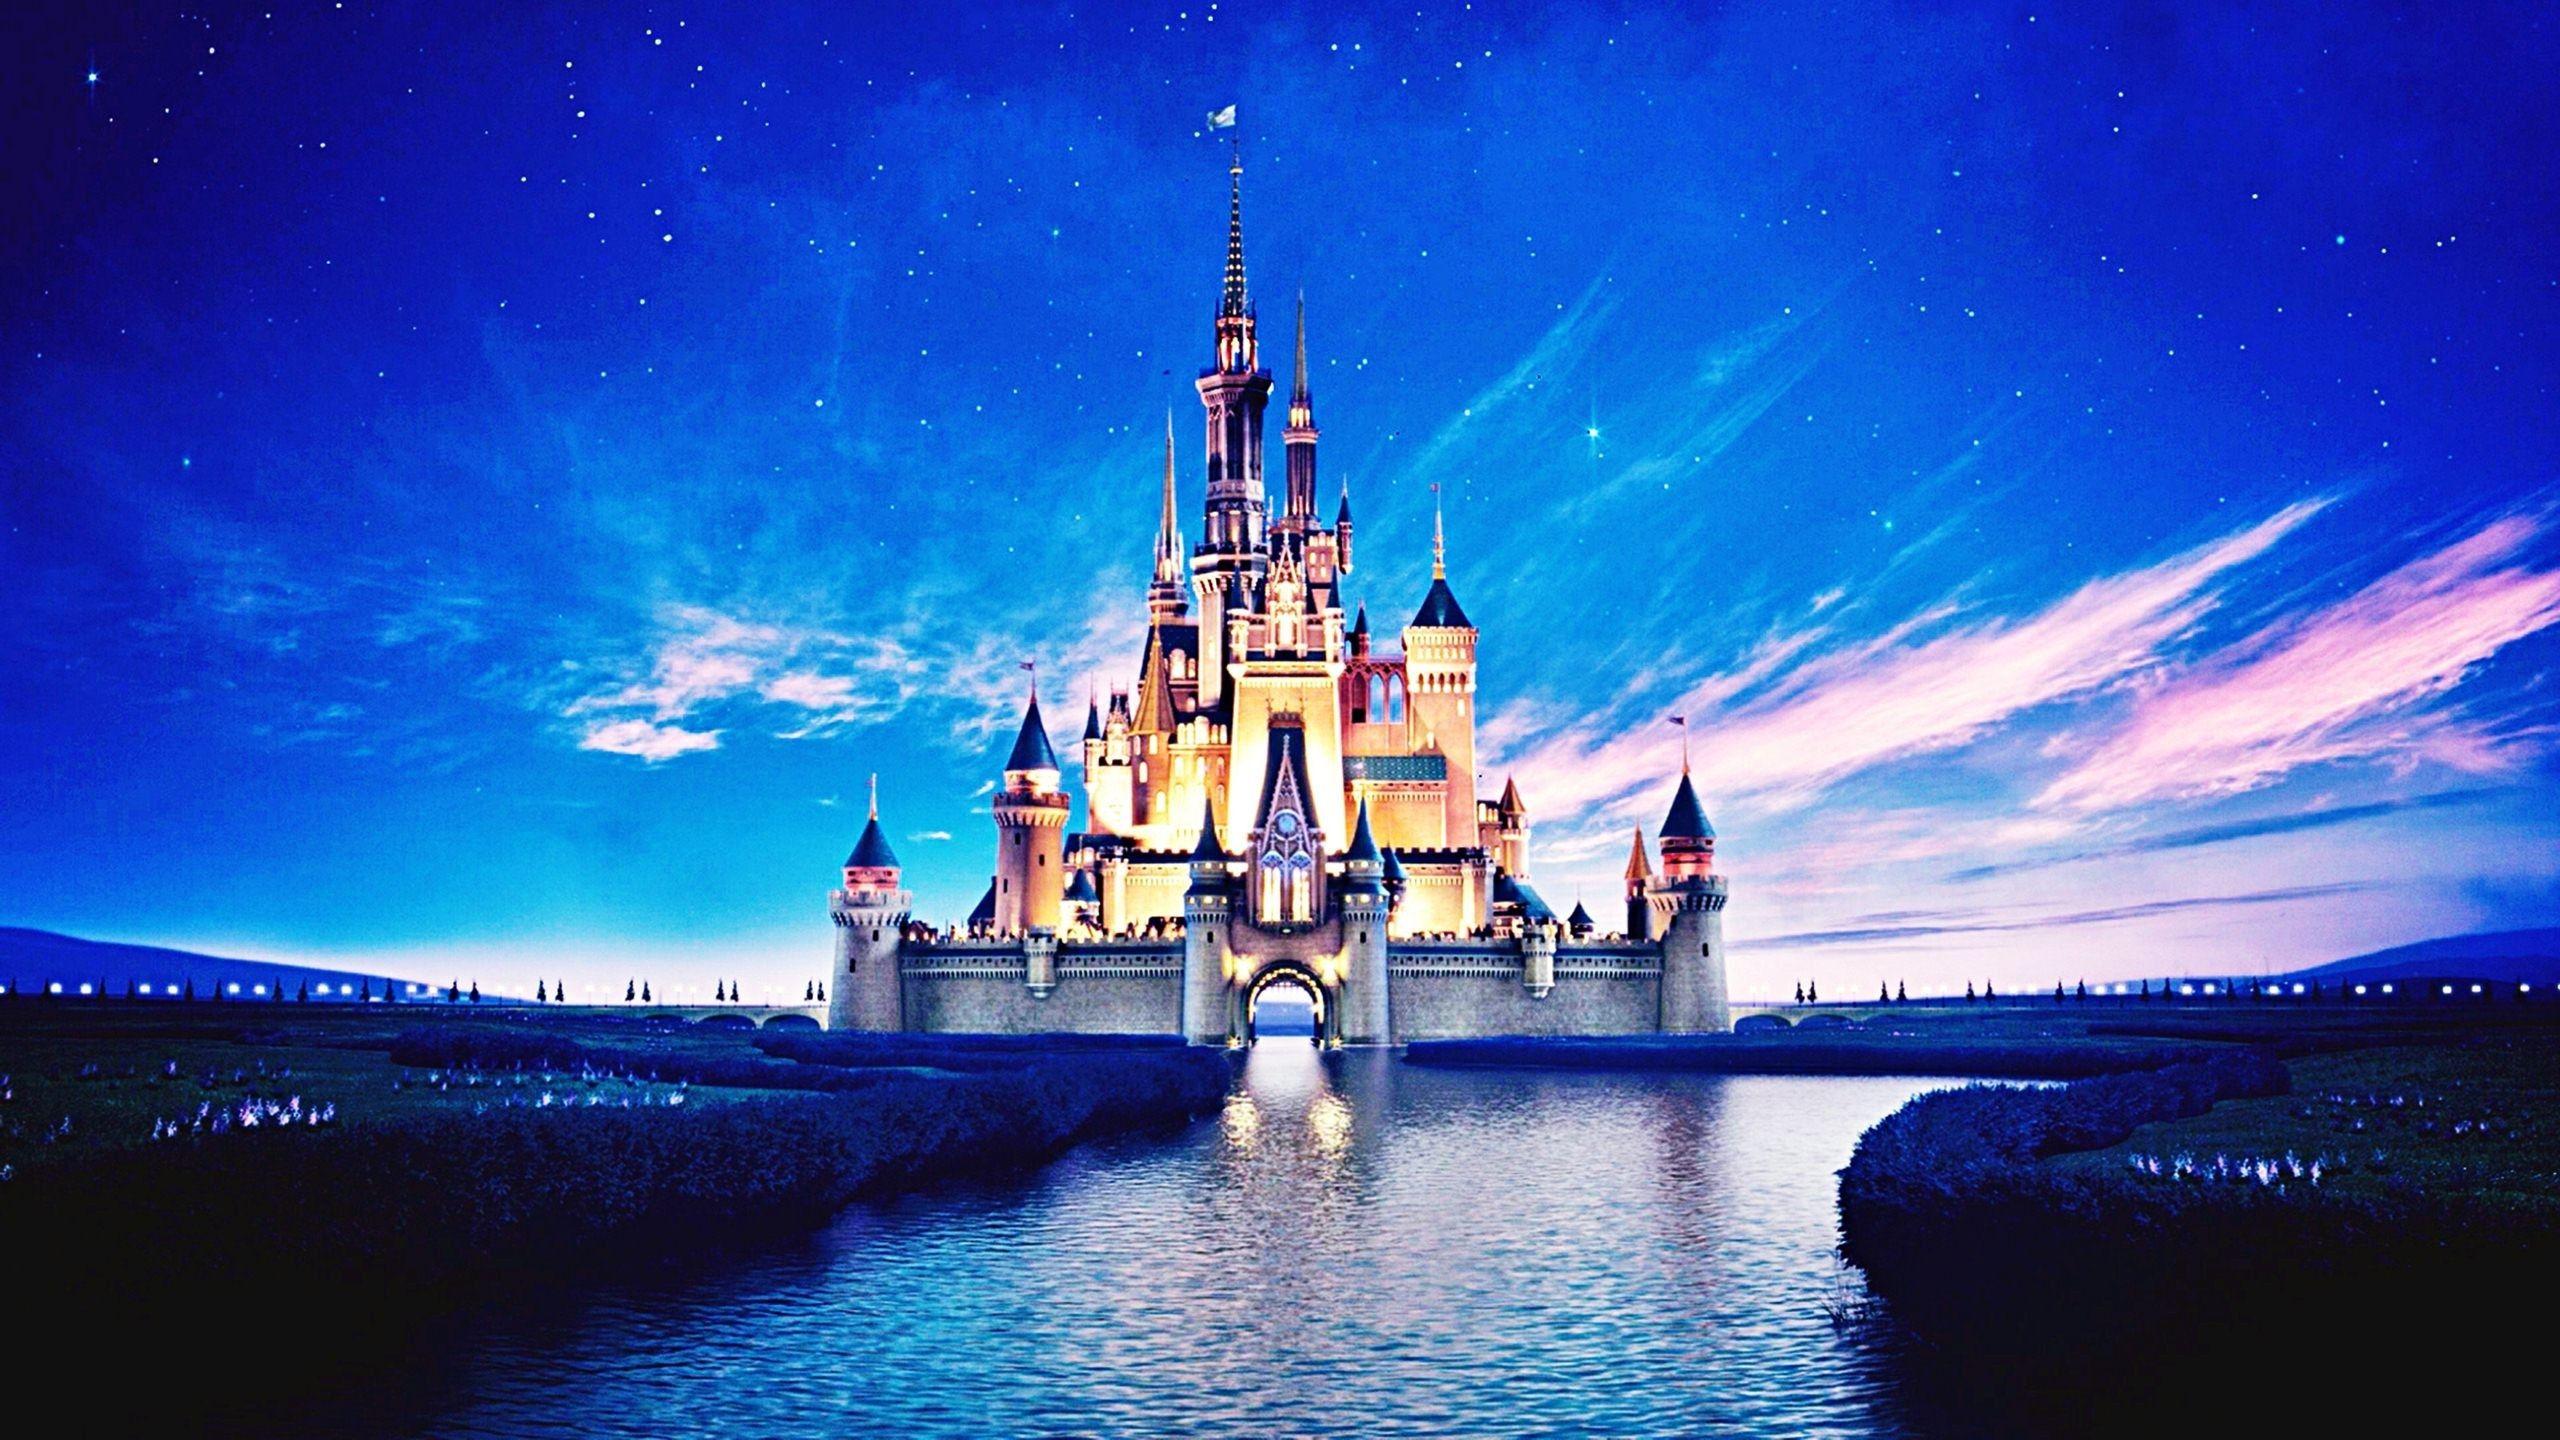 Awesome Disney Castle Wallpaper High Quality Background HD Image